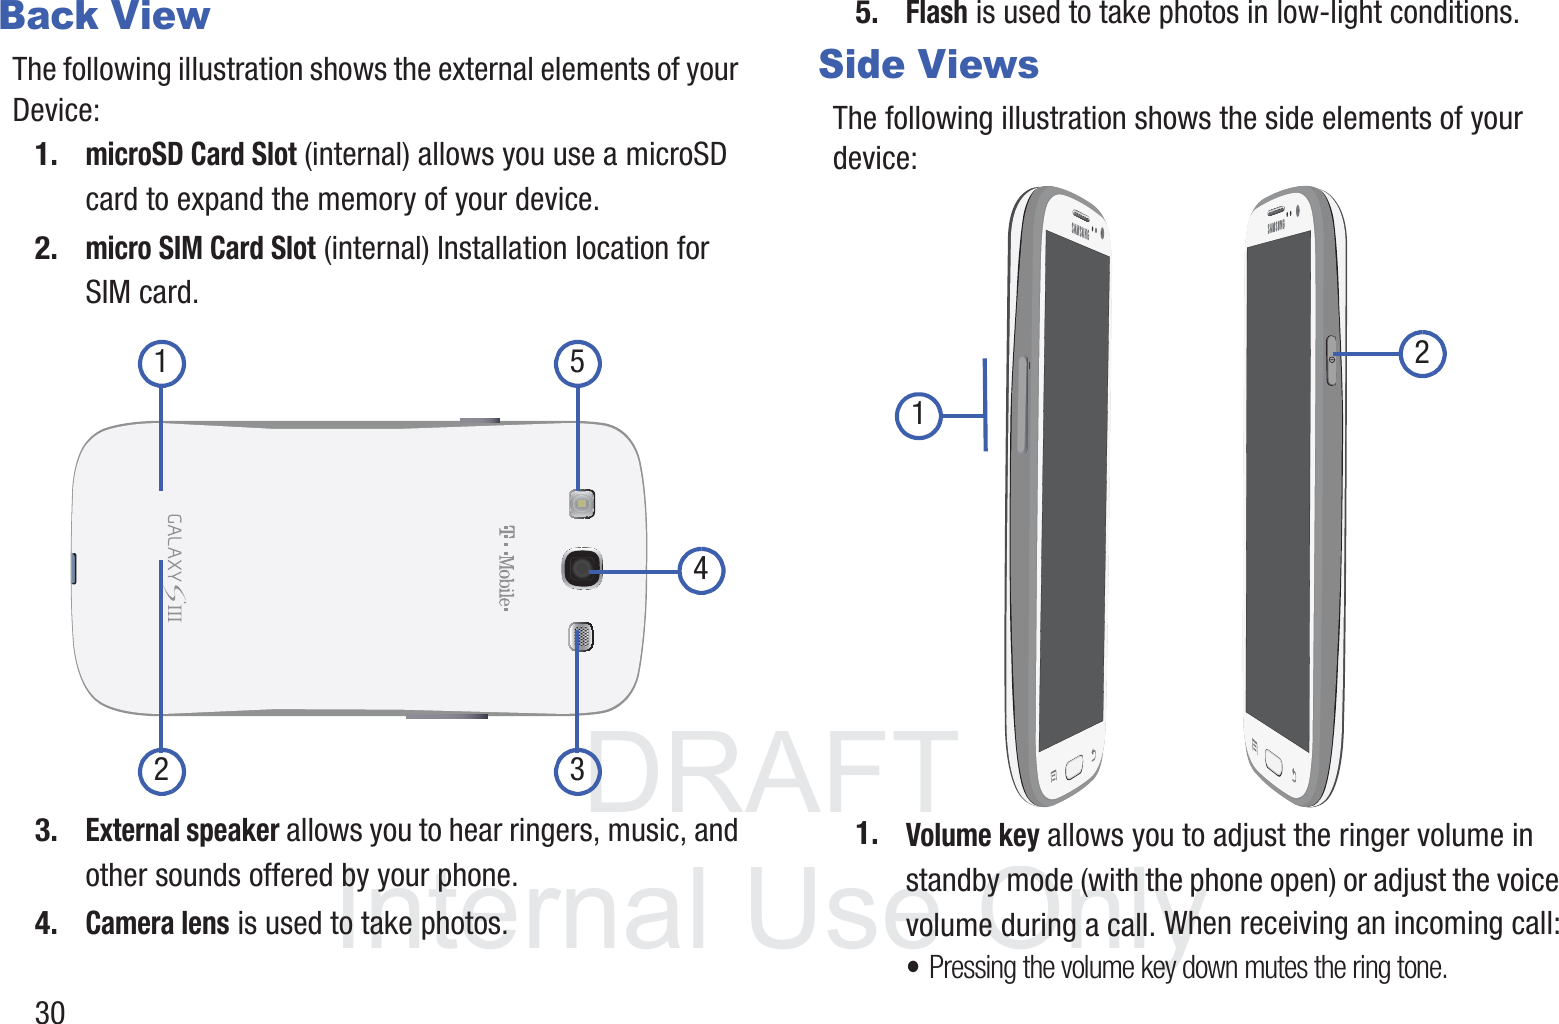 DRAFT InternalUse Only30Back ViewThe following illustration shows the external elements of your Device:1.microSD Card Slot (internal) allows you use a microSD card to expand the memory of your device. 2.micro SIM Card Slot (internal) Installation location for SIM card. 3.External speaker allows you to hear ringers, music, and other sounds offered by your phone.4.Camera lens is used to take photos.5.Flash is used to take photos in low-light conditions.Side ViewsThe following illustration shows the side elements of your device:  1.Volume key allows you to adjust the ringer volume in standby mode (with the phone open) or adjust the voice volume during a call. When receiving an incoming call:•Pressing the volume key down mutes the ring tone. 2 341 5 21